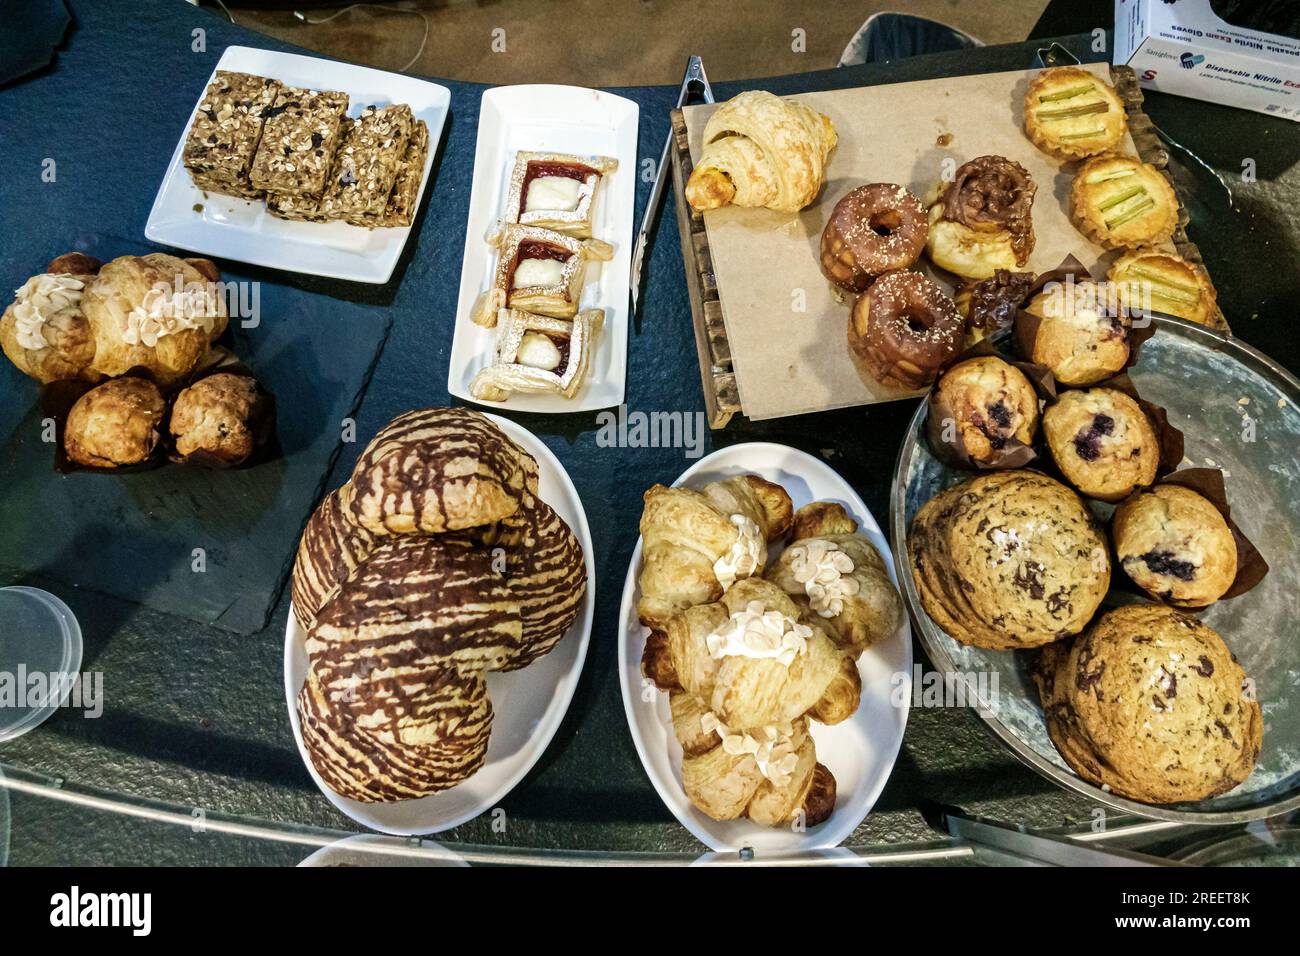 Asheville North Carolina,The Rhu cafe bakery pantry pastries sweets desserts display counter Stock Photo